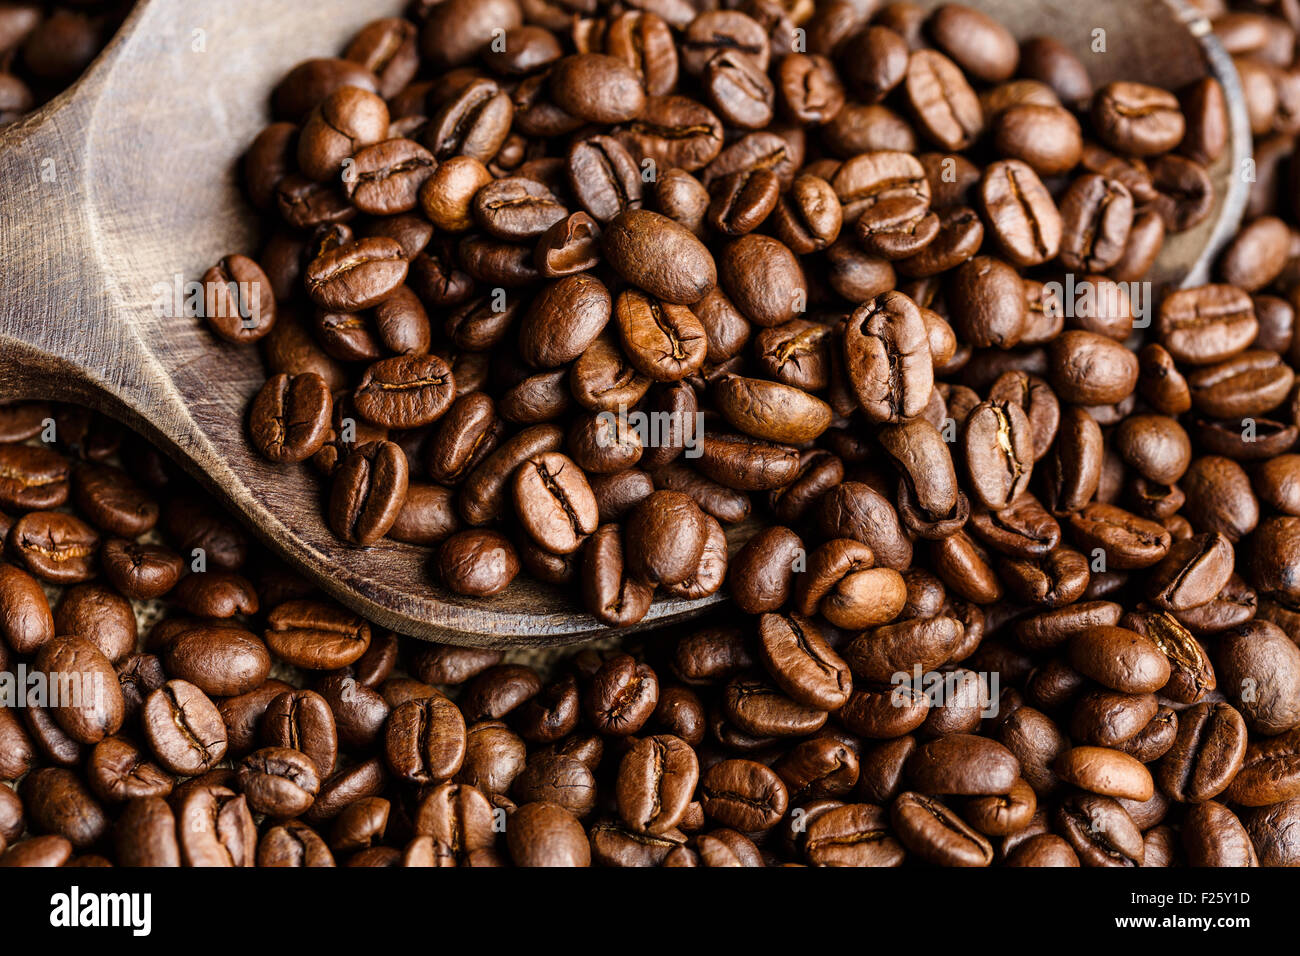 Coffee beans on a wooden spoon Stock Photo